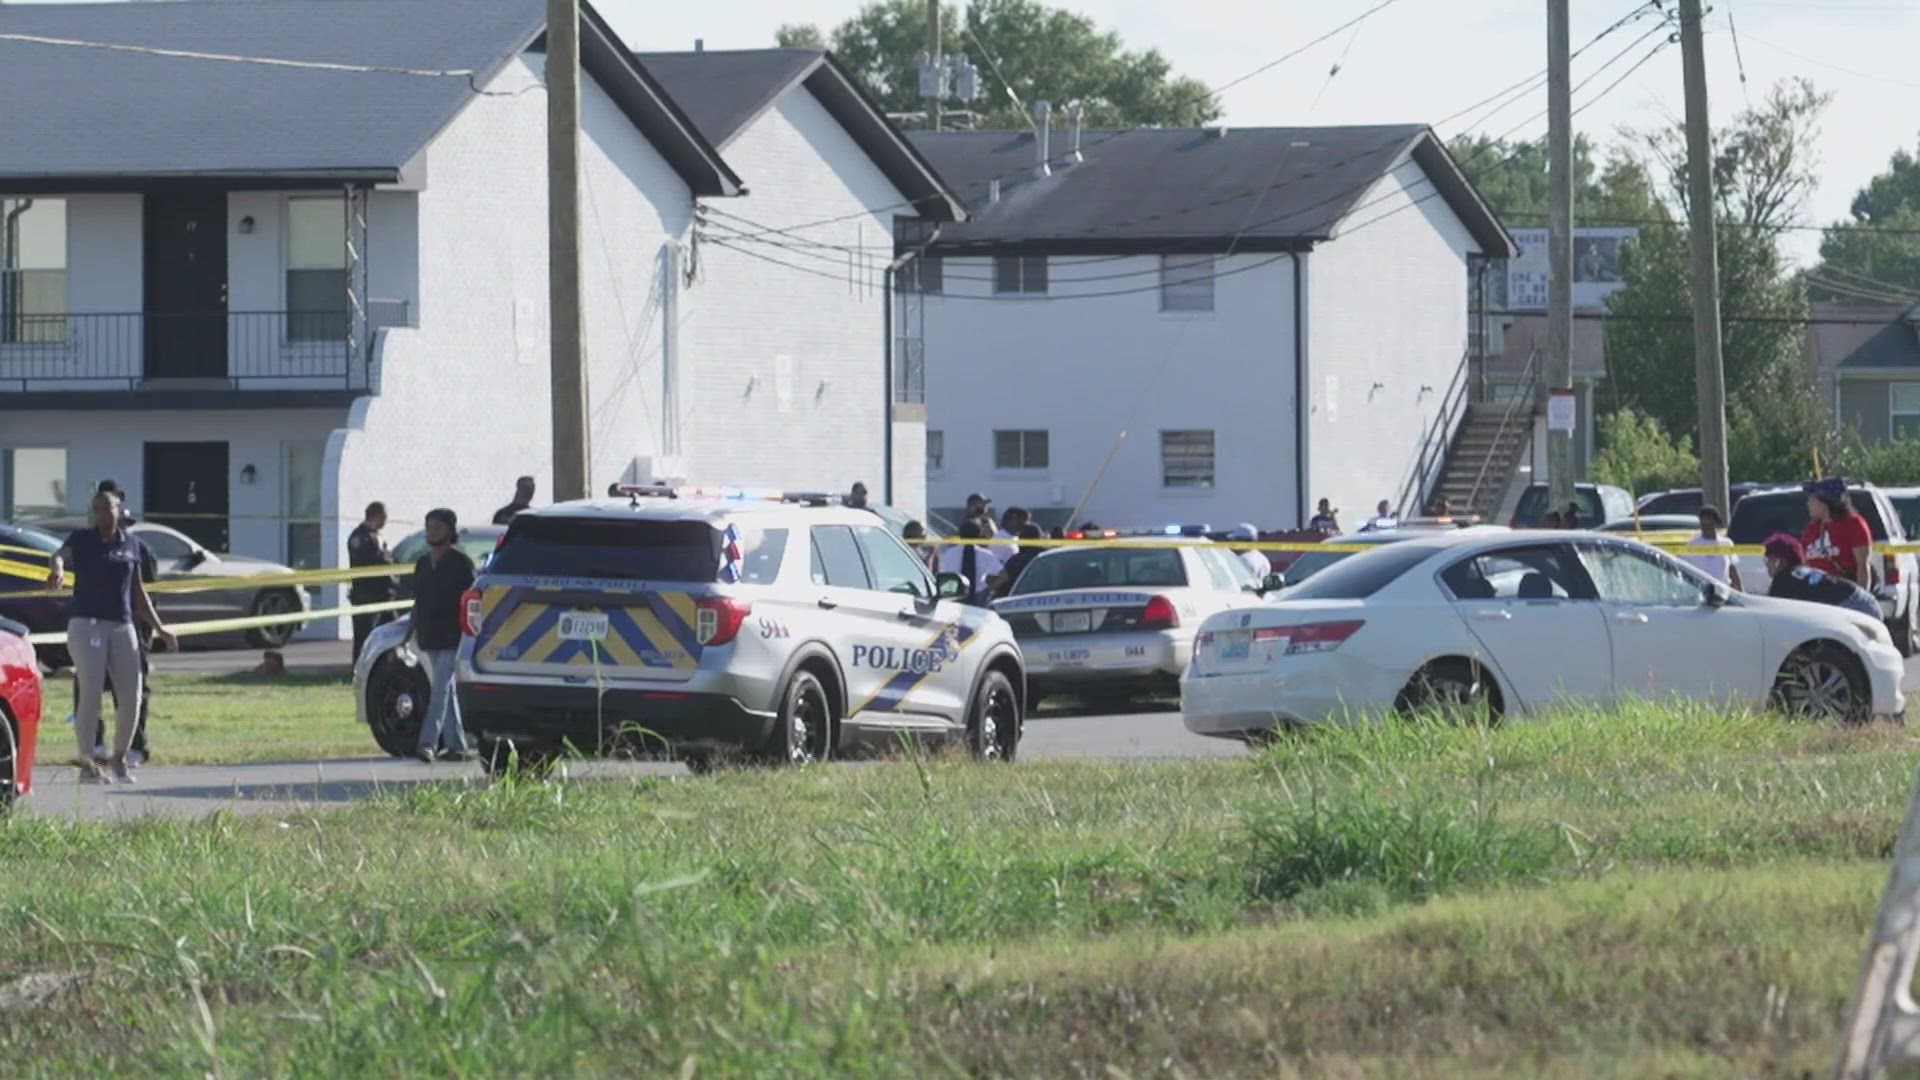 Police said at least one person is dead, and they were found inside an apartment.